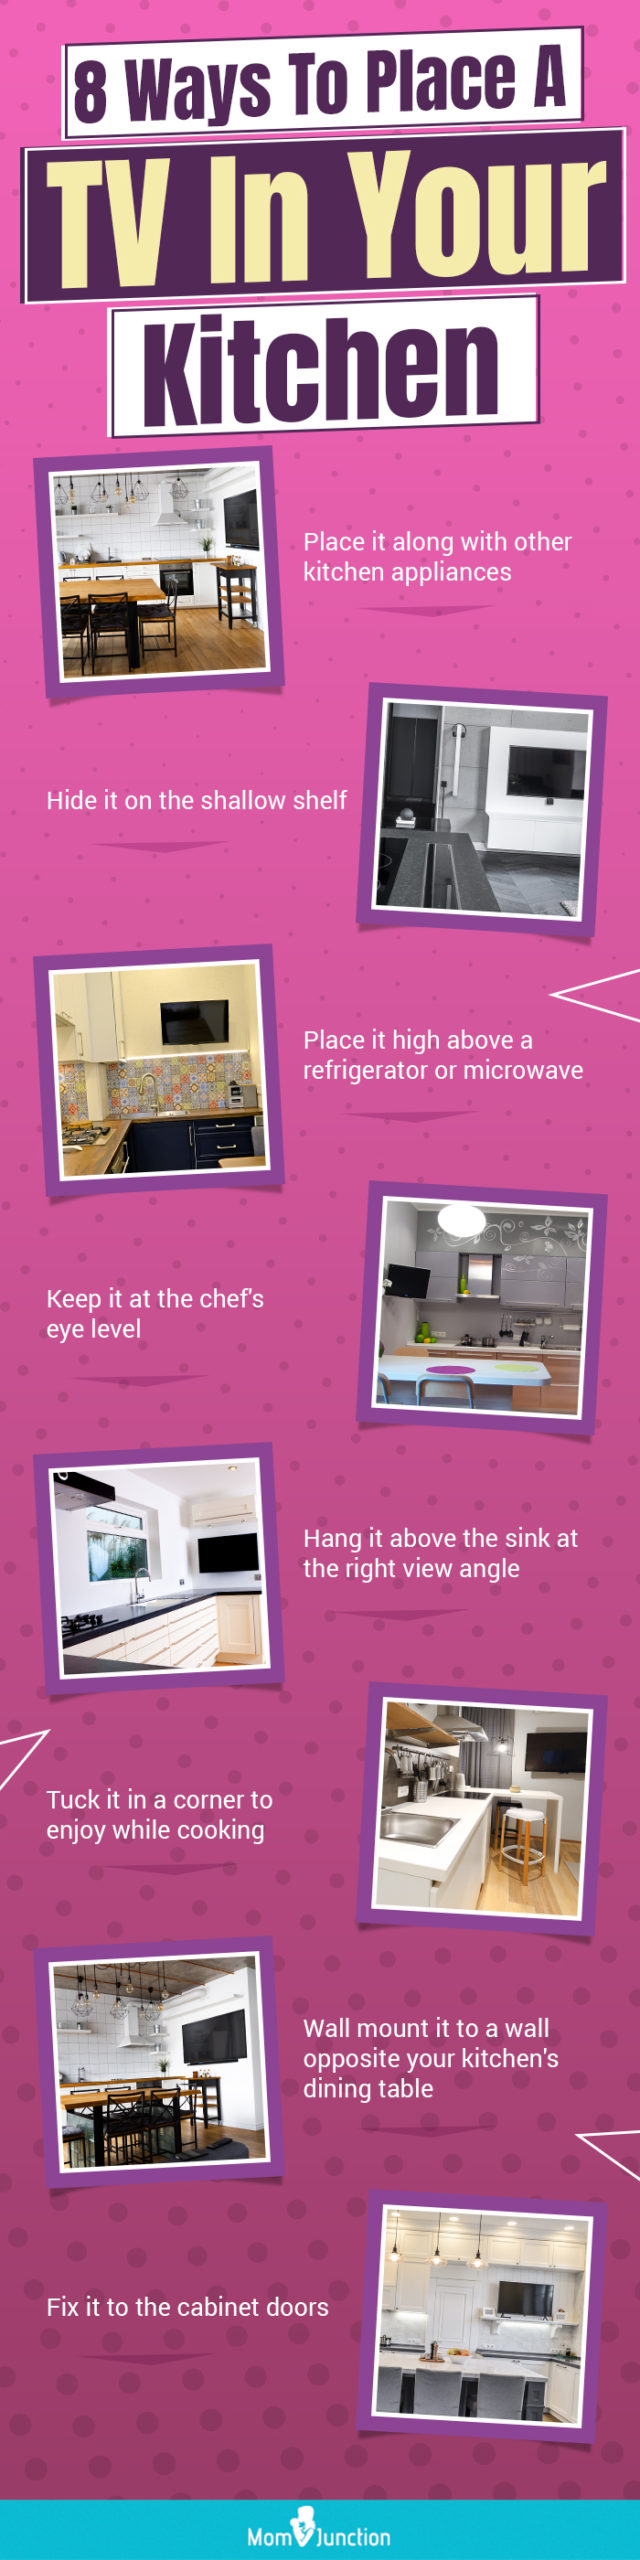 8-Ways-To-Place-A-TV-In-Your-Kitchenr (infographic)